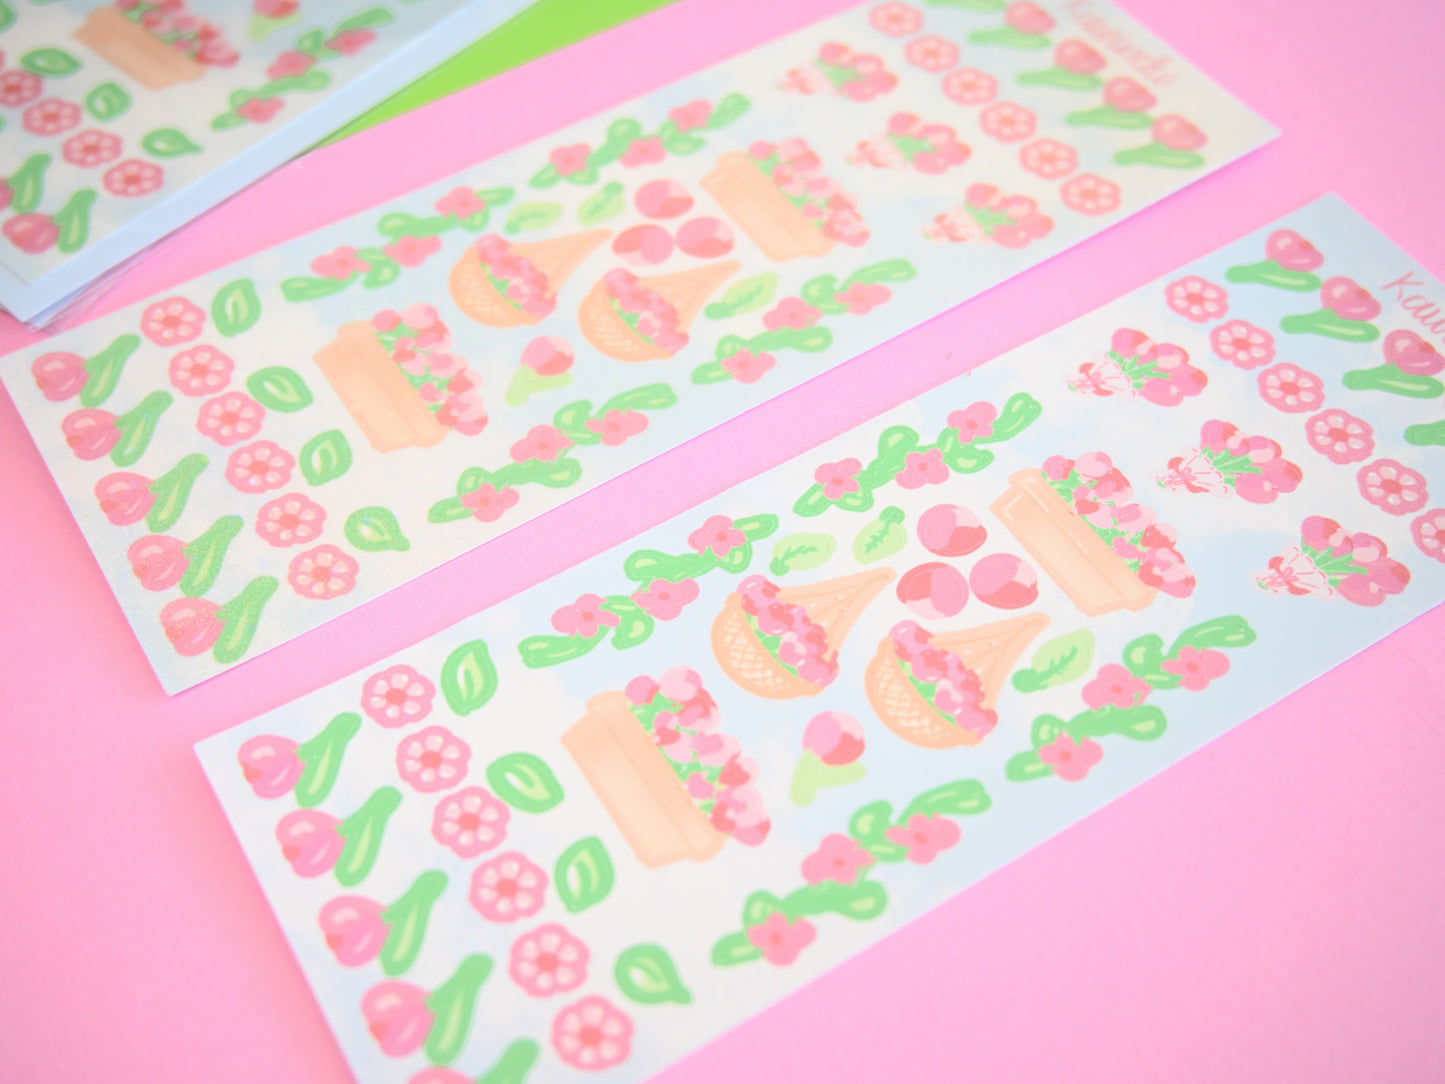 Flowers and bouquet stickers